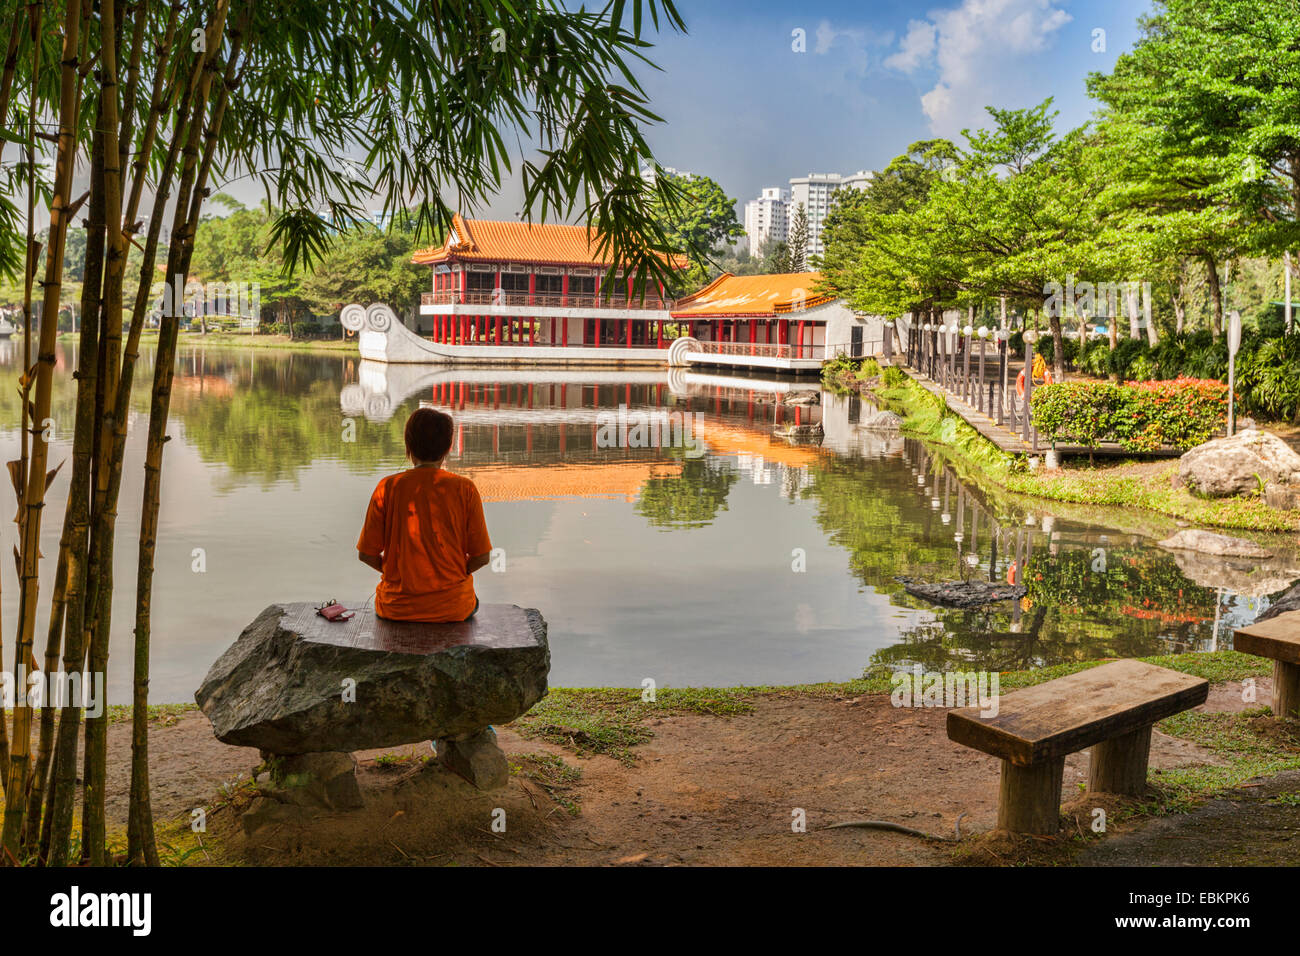 Visitor sitting on stone bench and looking out over lake to stone boat in Singapore Chinese Garden Stock Photo